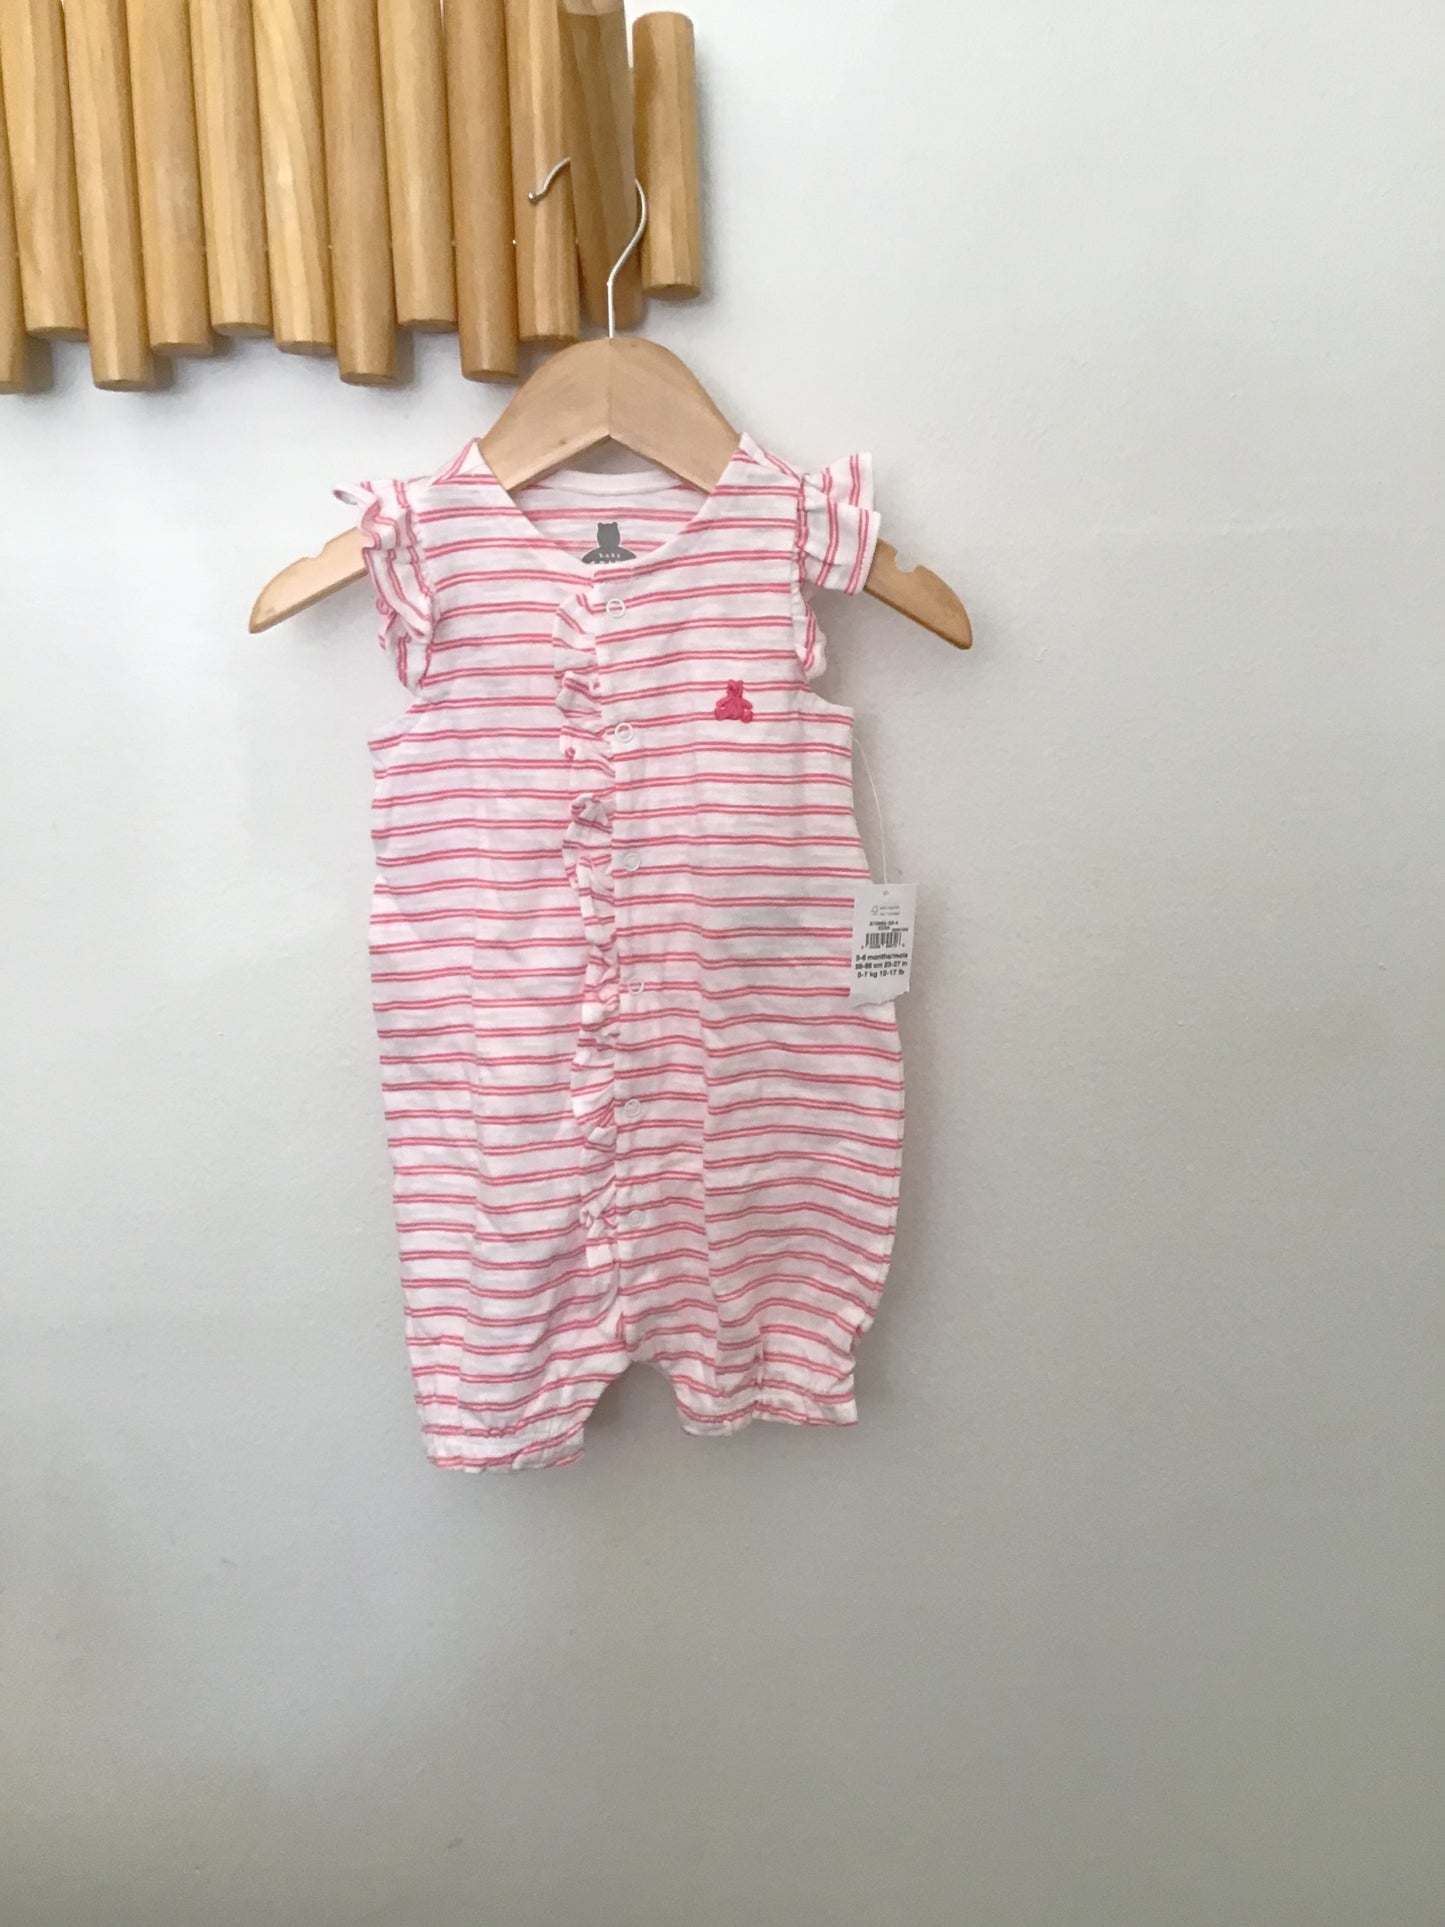 Striped frilly shorty romper 3-6m NEW